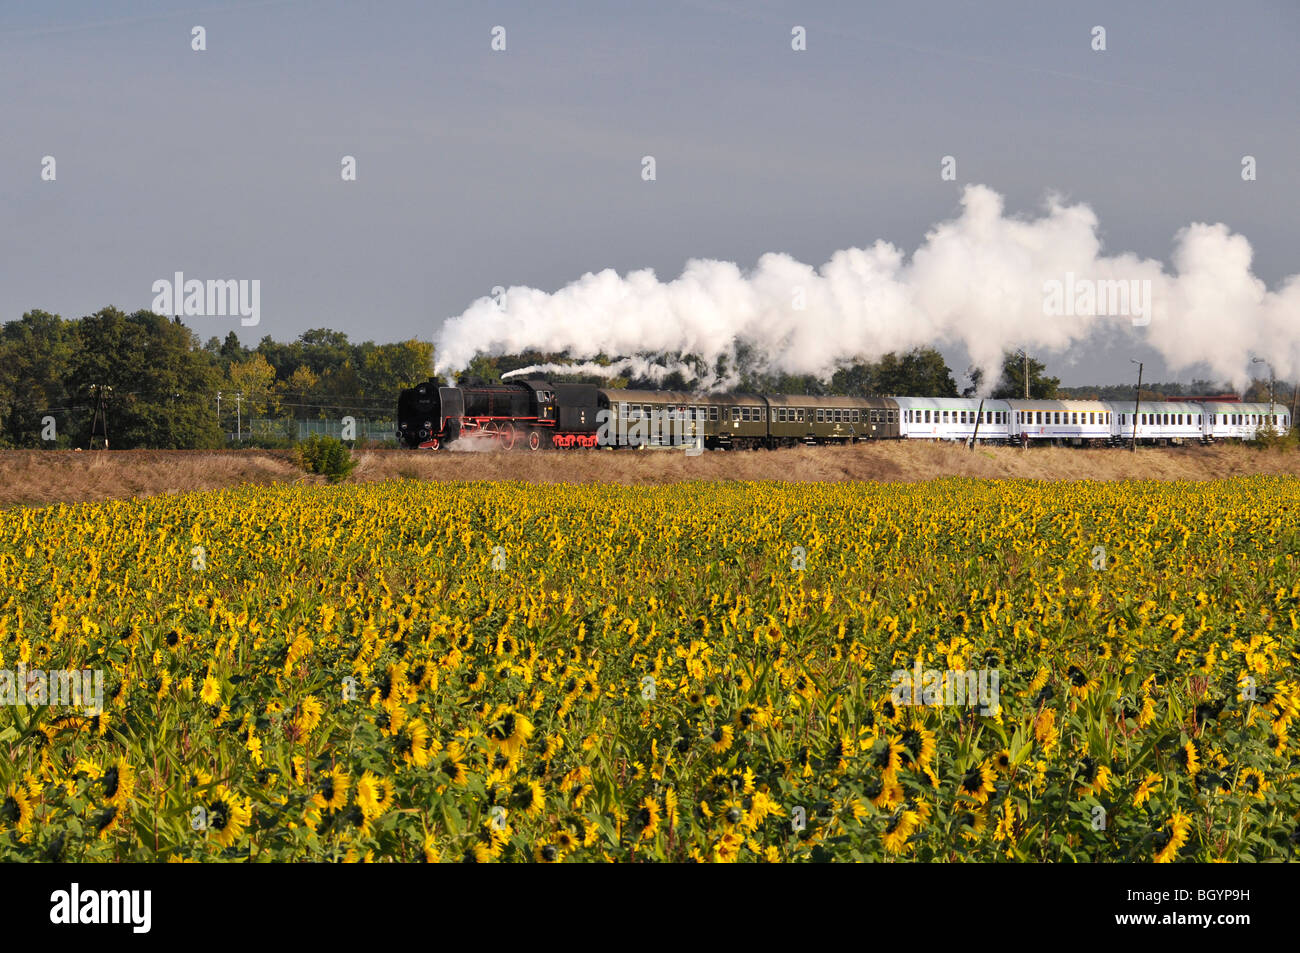 Steam loco under steam viewed across a field of sun flowers in Poland,with directional sunshine highlighting the carriages. Stock Photo